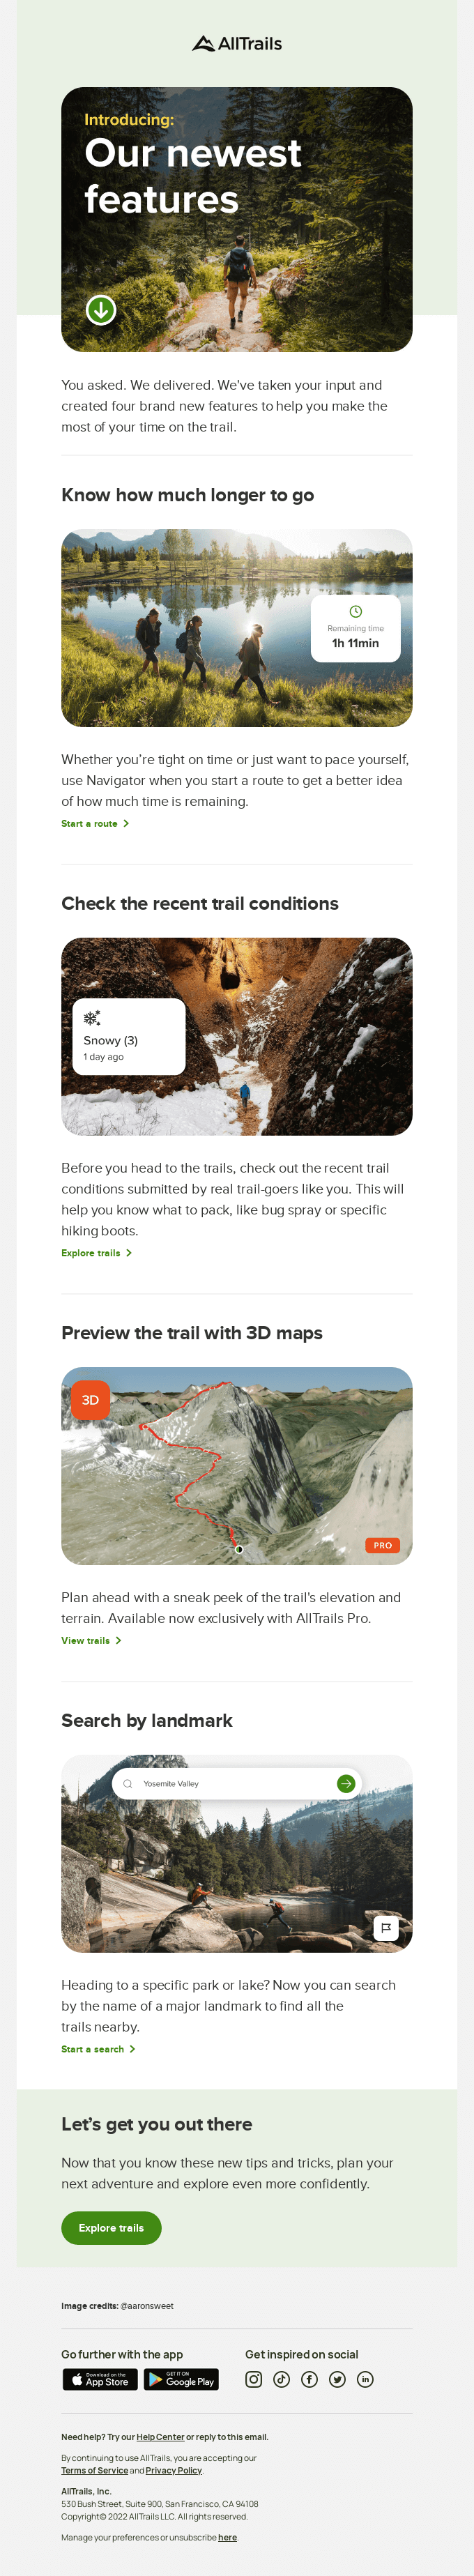 AllTrails- Product update email